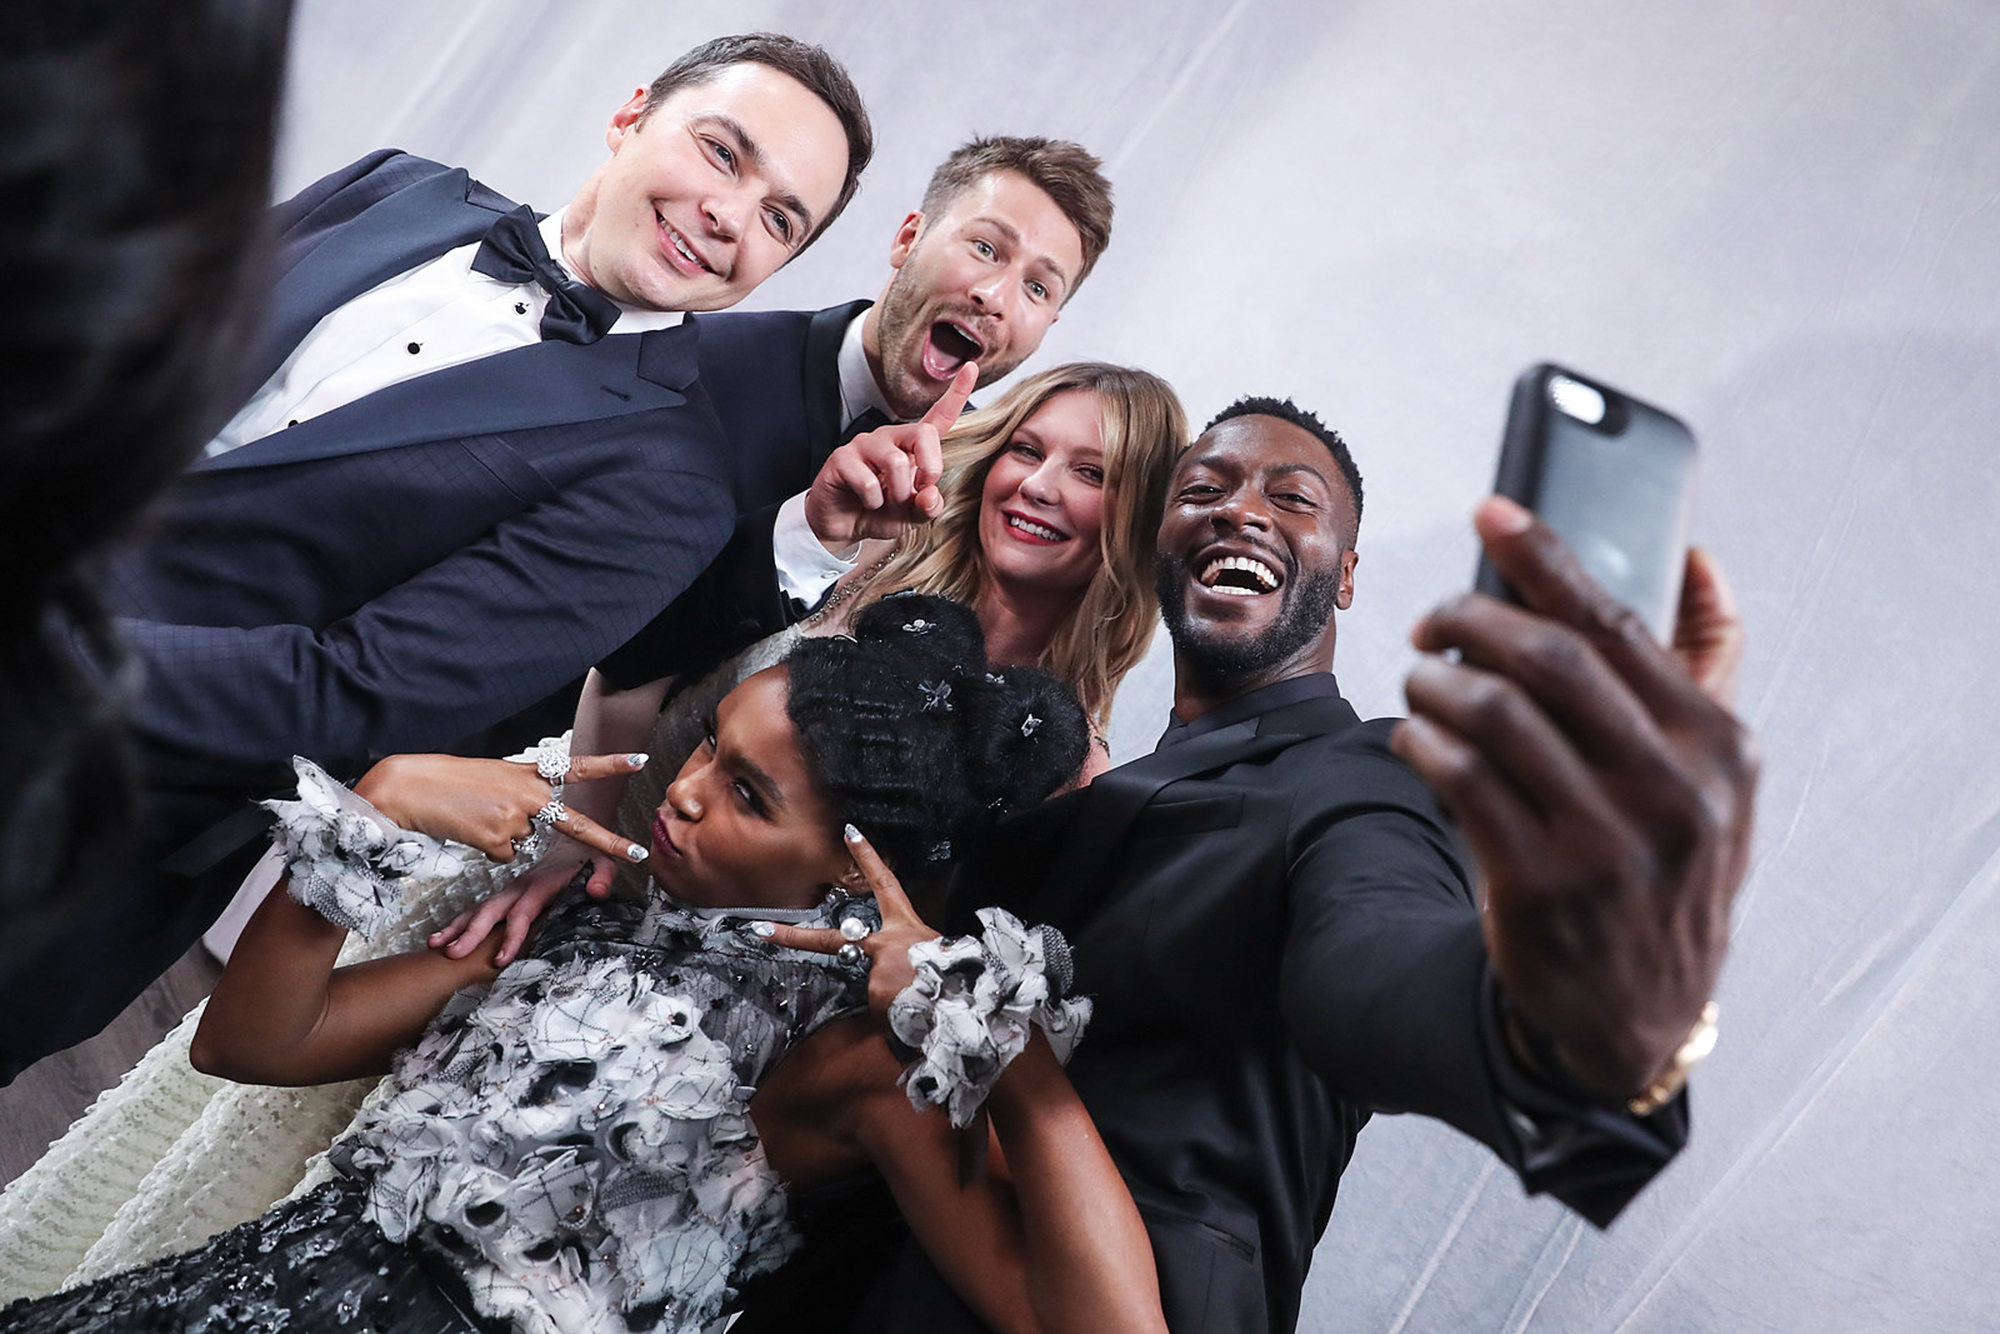 Jim Parsons, Glen Powell, Kirsten Dunst, Aldis Hodge, and Janelle Monae at the 23rd Annual Screen Actors Guild Awards in Los Angeles, on Jan. 29, 2017.